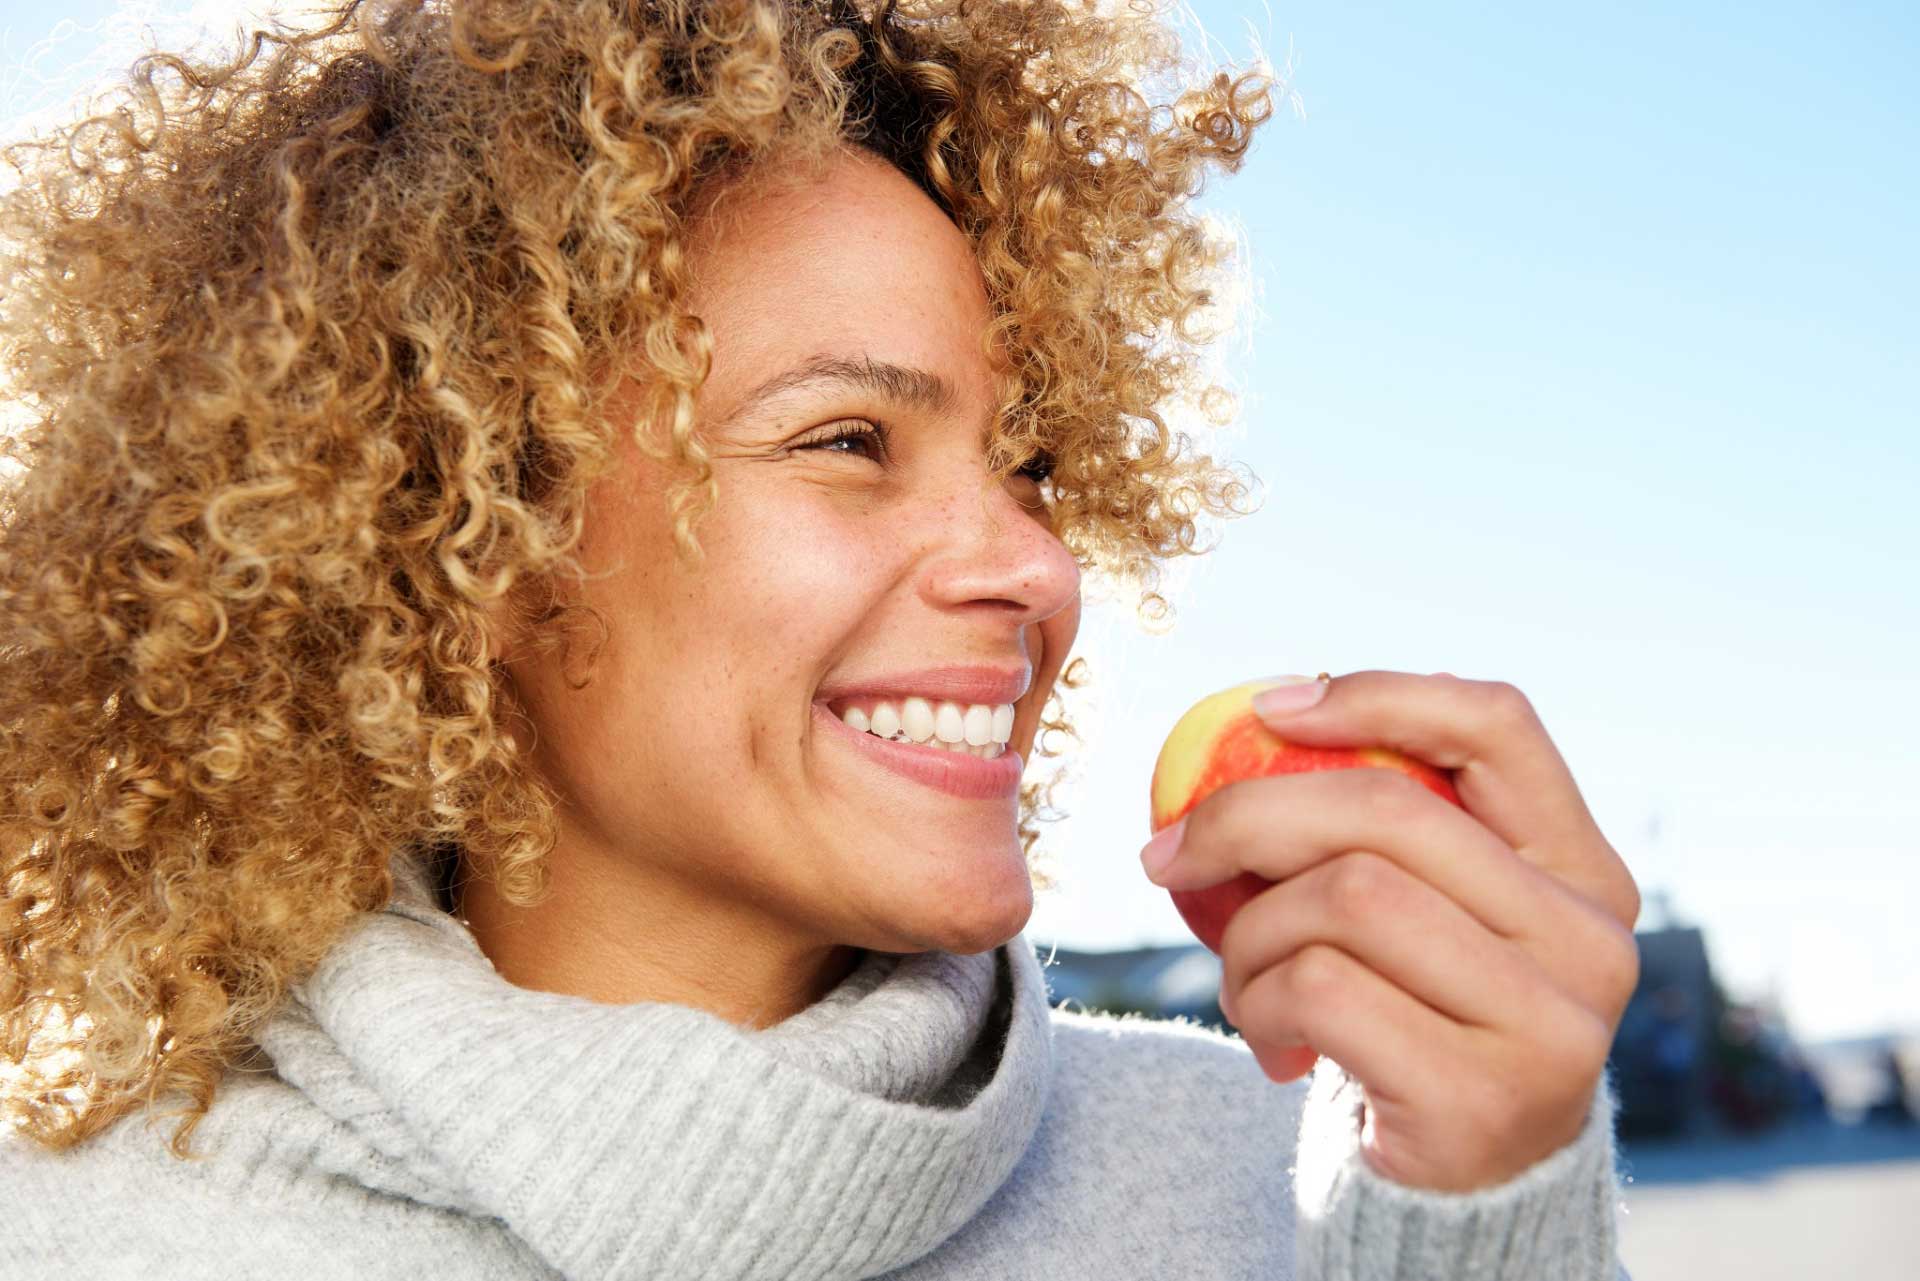 A close-up of a smiling woman standing outdoors with a fresh apple in her hand.